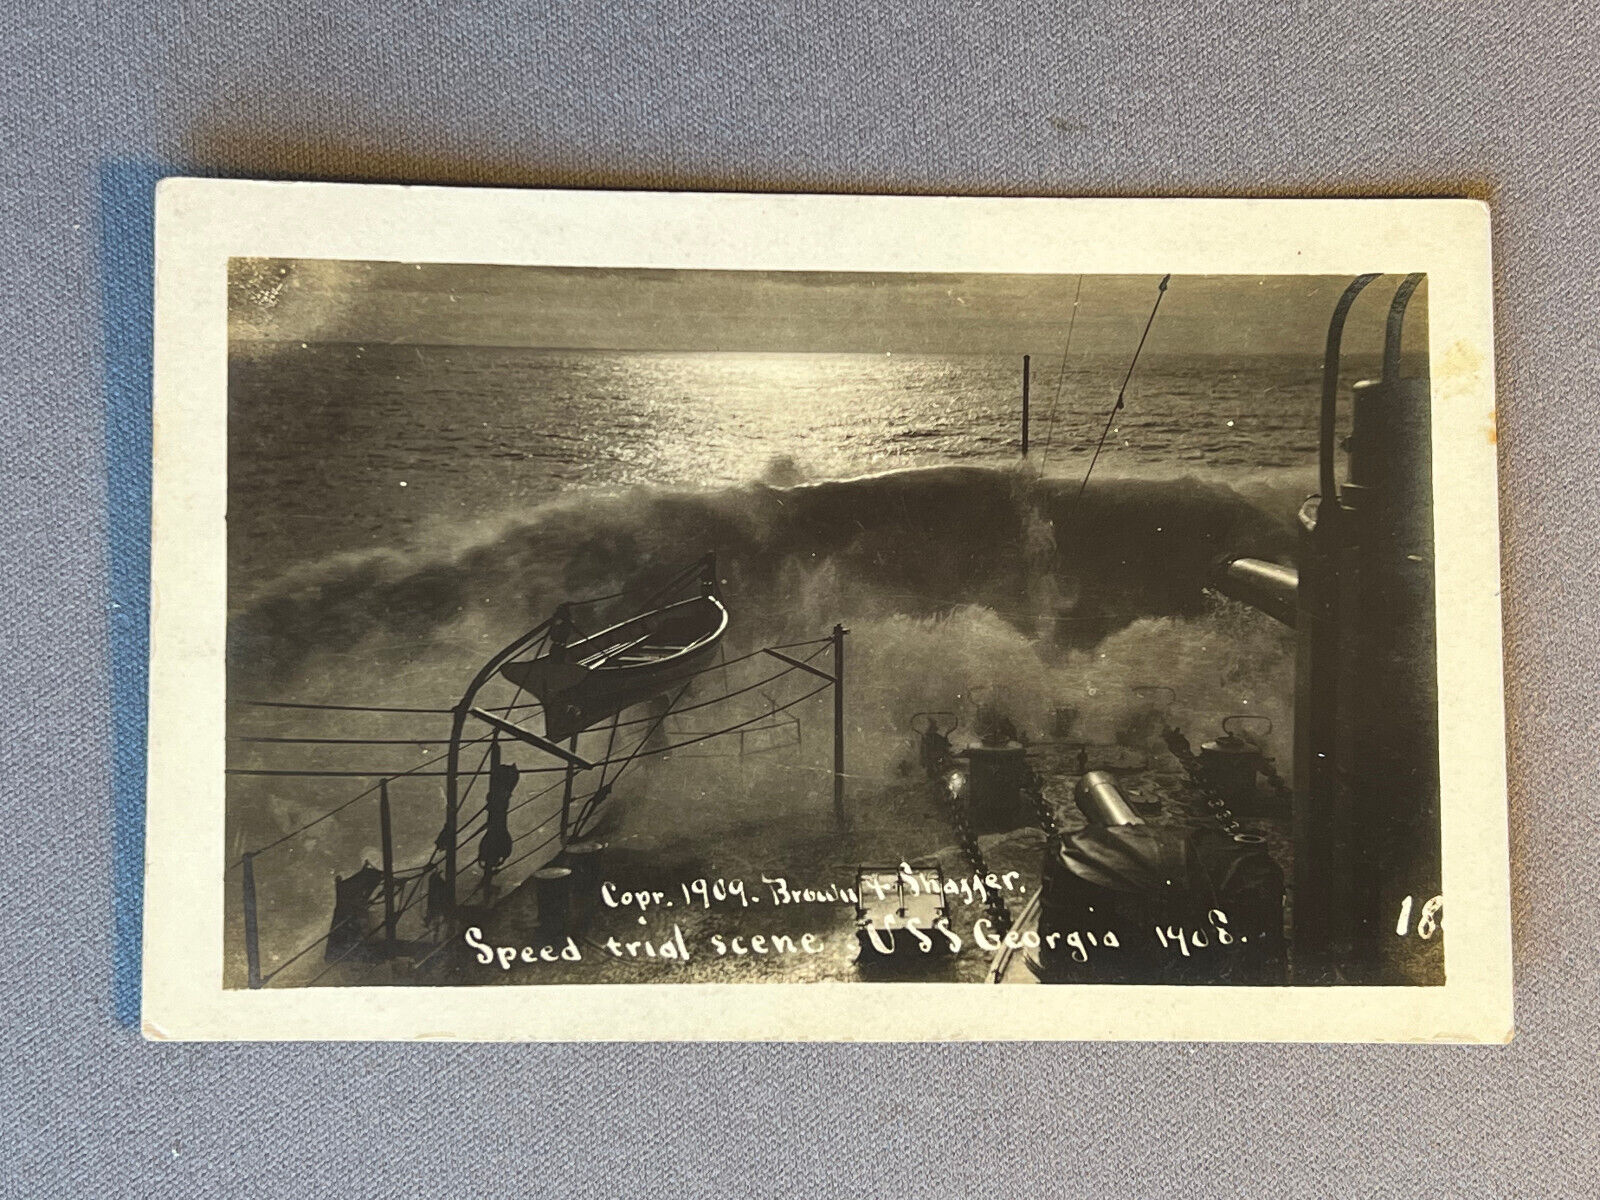 Onboard The U. S. S. Georgia Warship During Speed Trials, RPPC, 1909